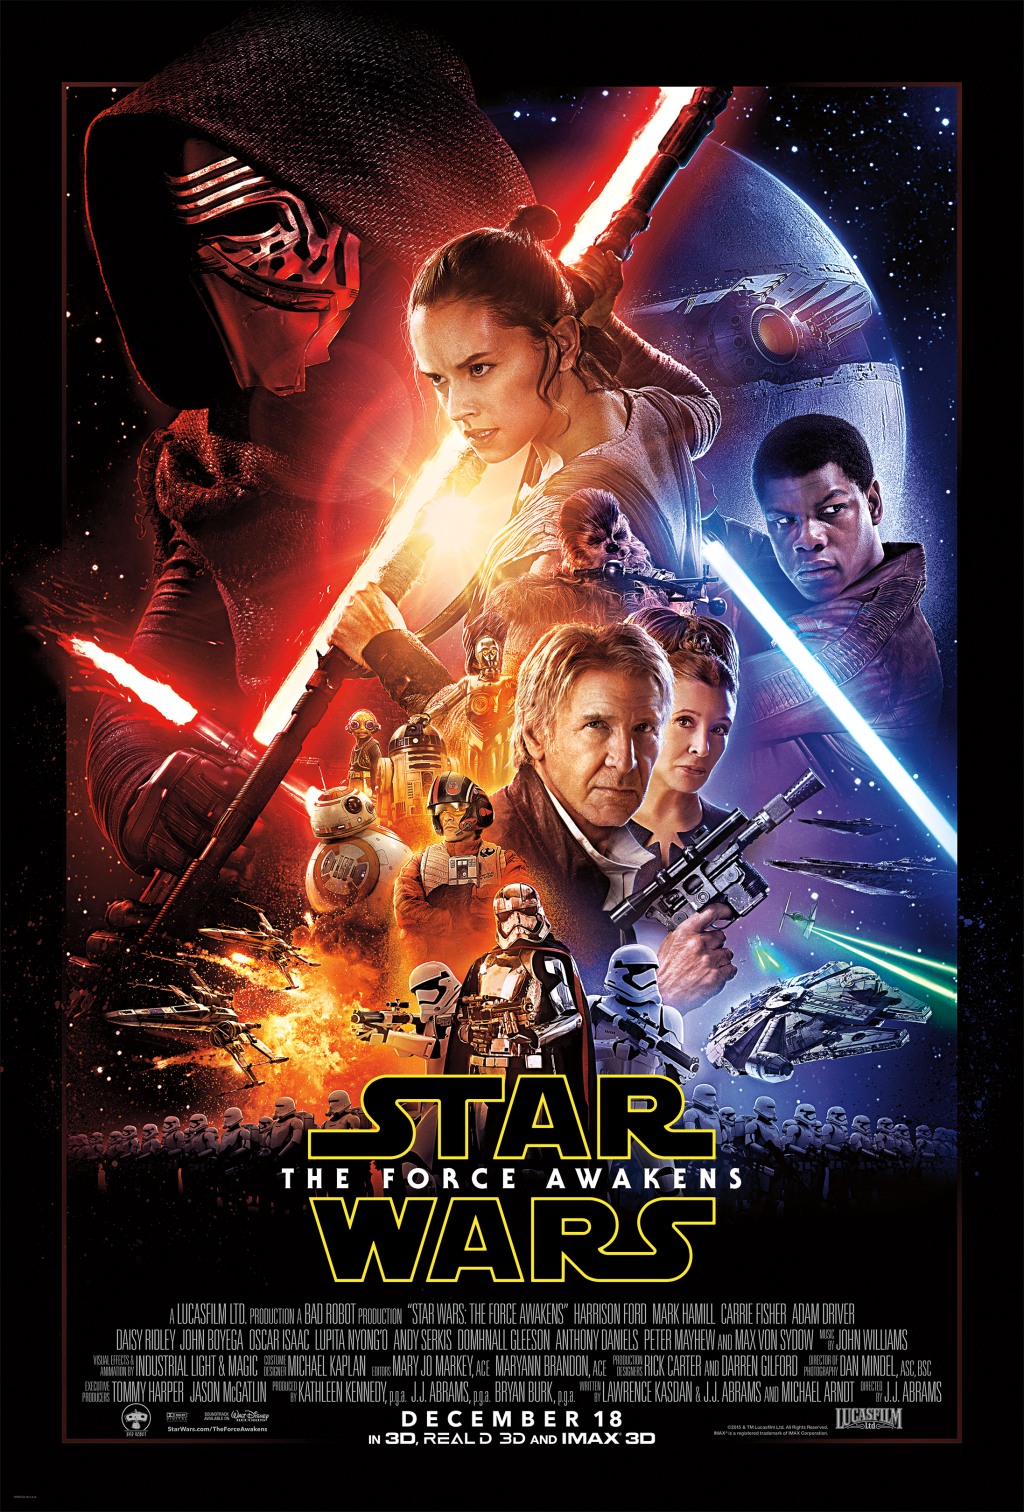 Star Wars: Episode 7 – The Force Awakens